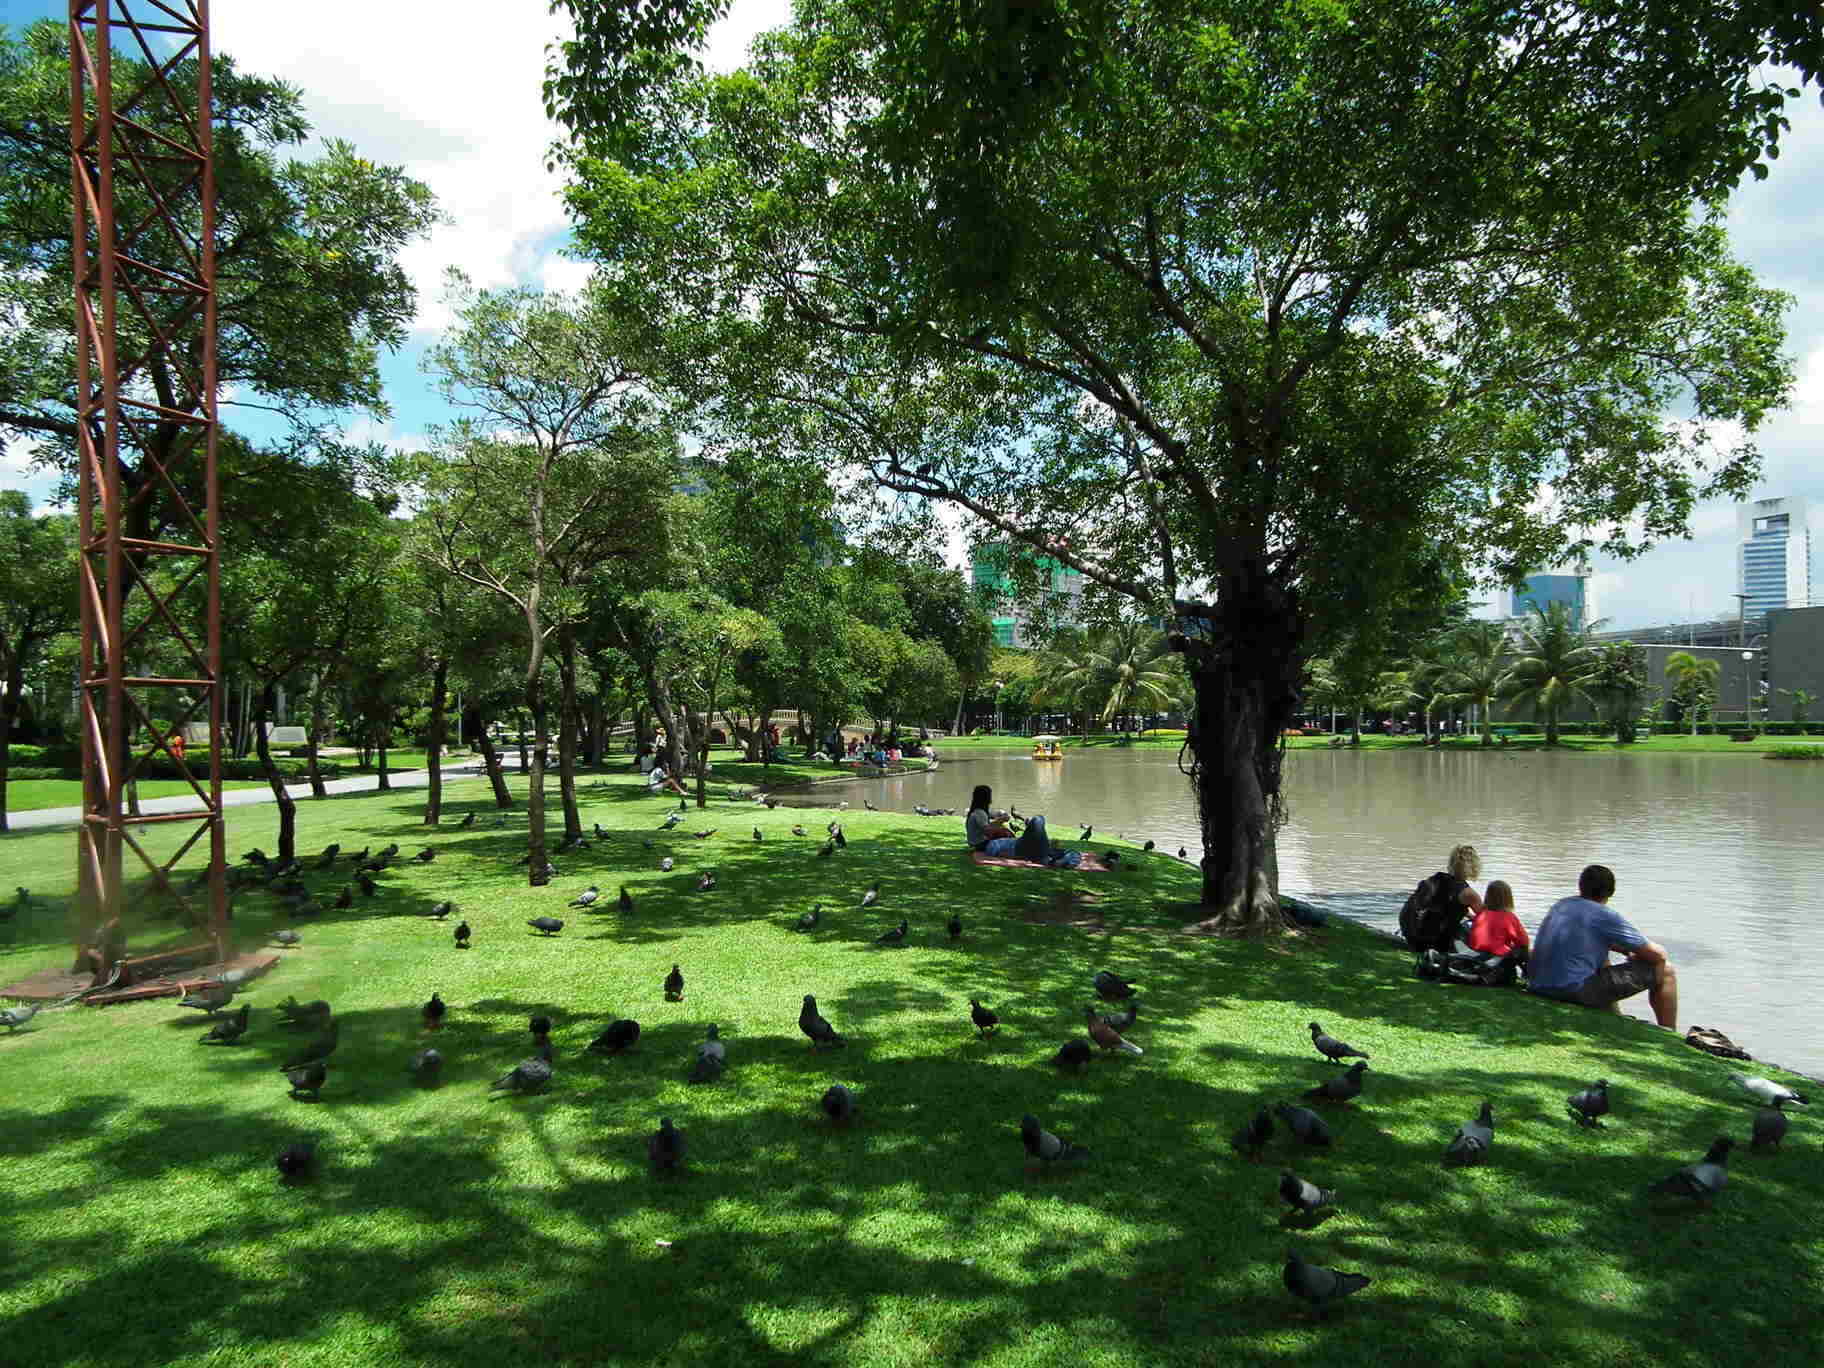 Picnic In The Park - Activities, Picnic | River | Grass | People | Water | Park | Summer | Scenery